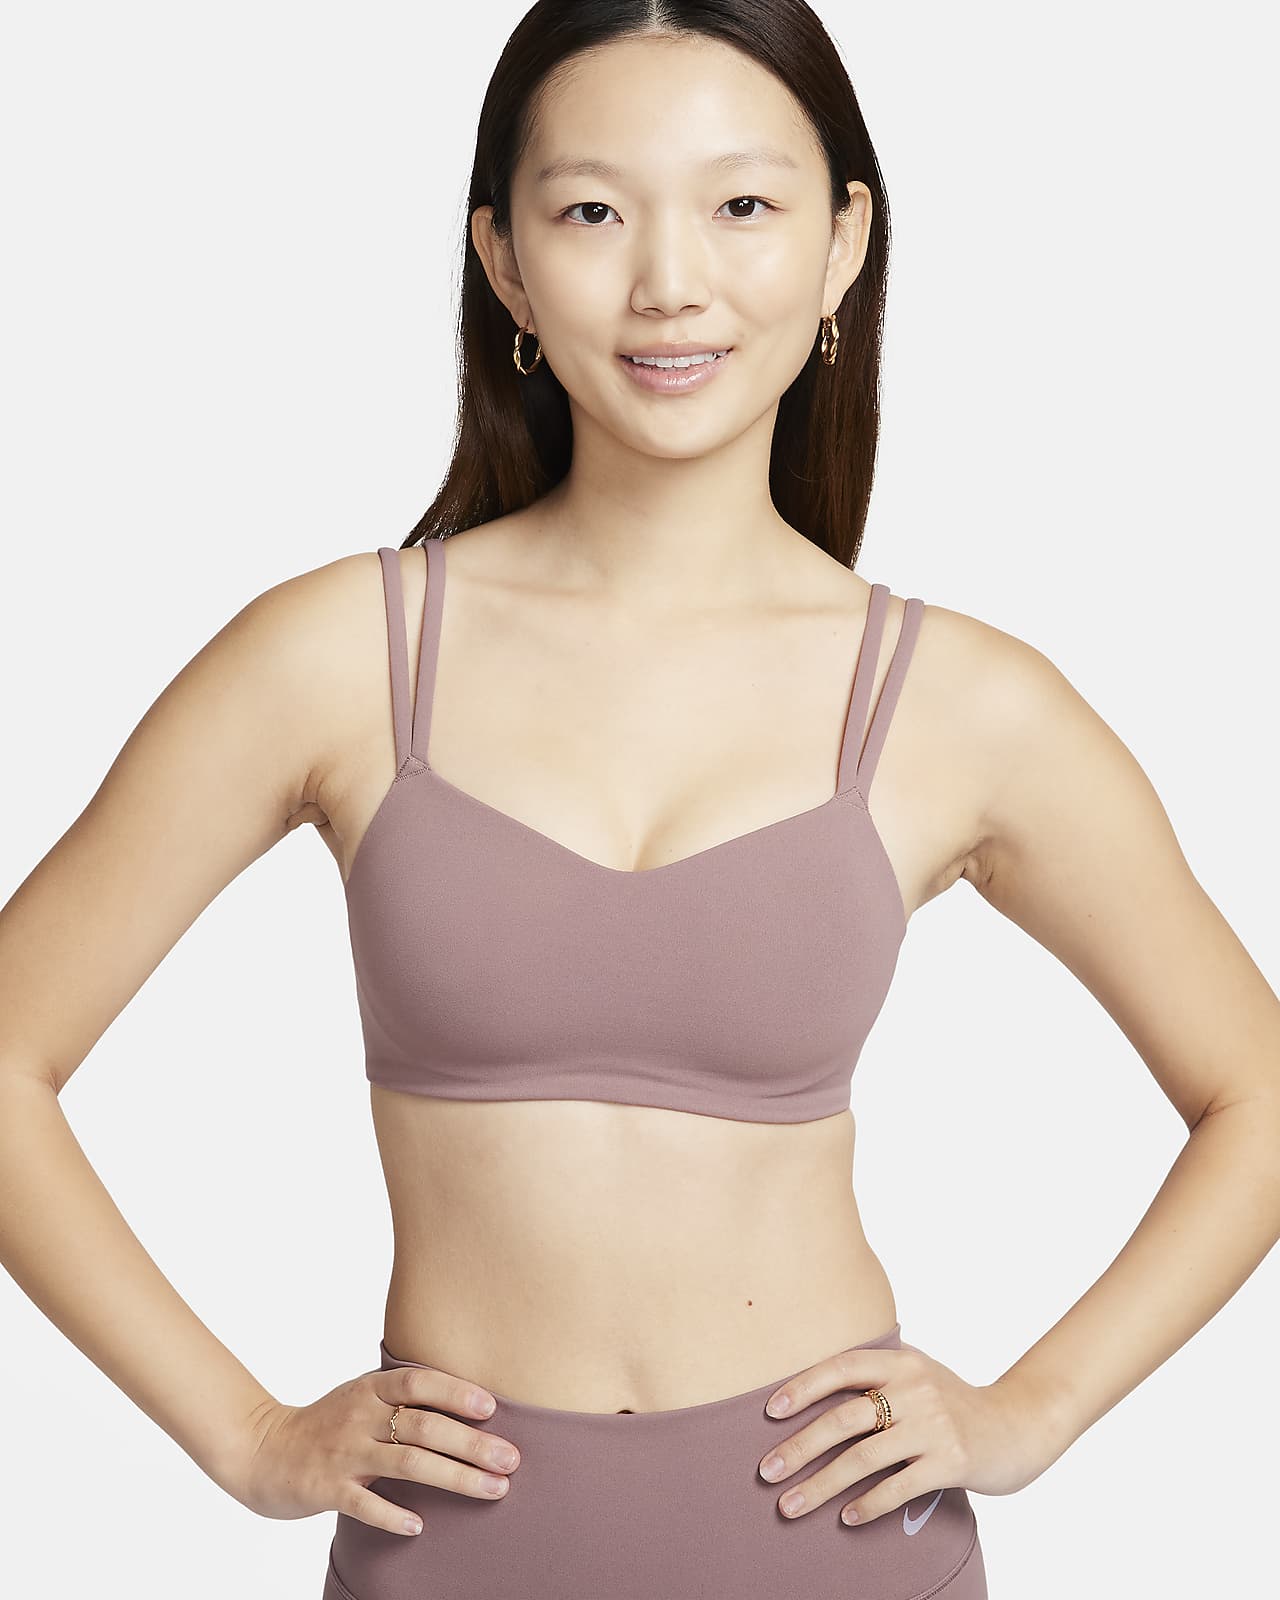 https://static.nike.com/a/images/t_PDP_1280_v1/f_auto,q_auto:eco/7a0c9e5d-d0c1-4303-a199-01d57c28be48/zenvy-strappy-light-support-padded-sports-bra-1HJfhZ.png